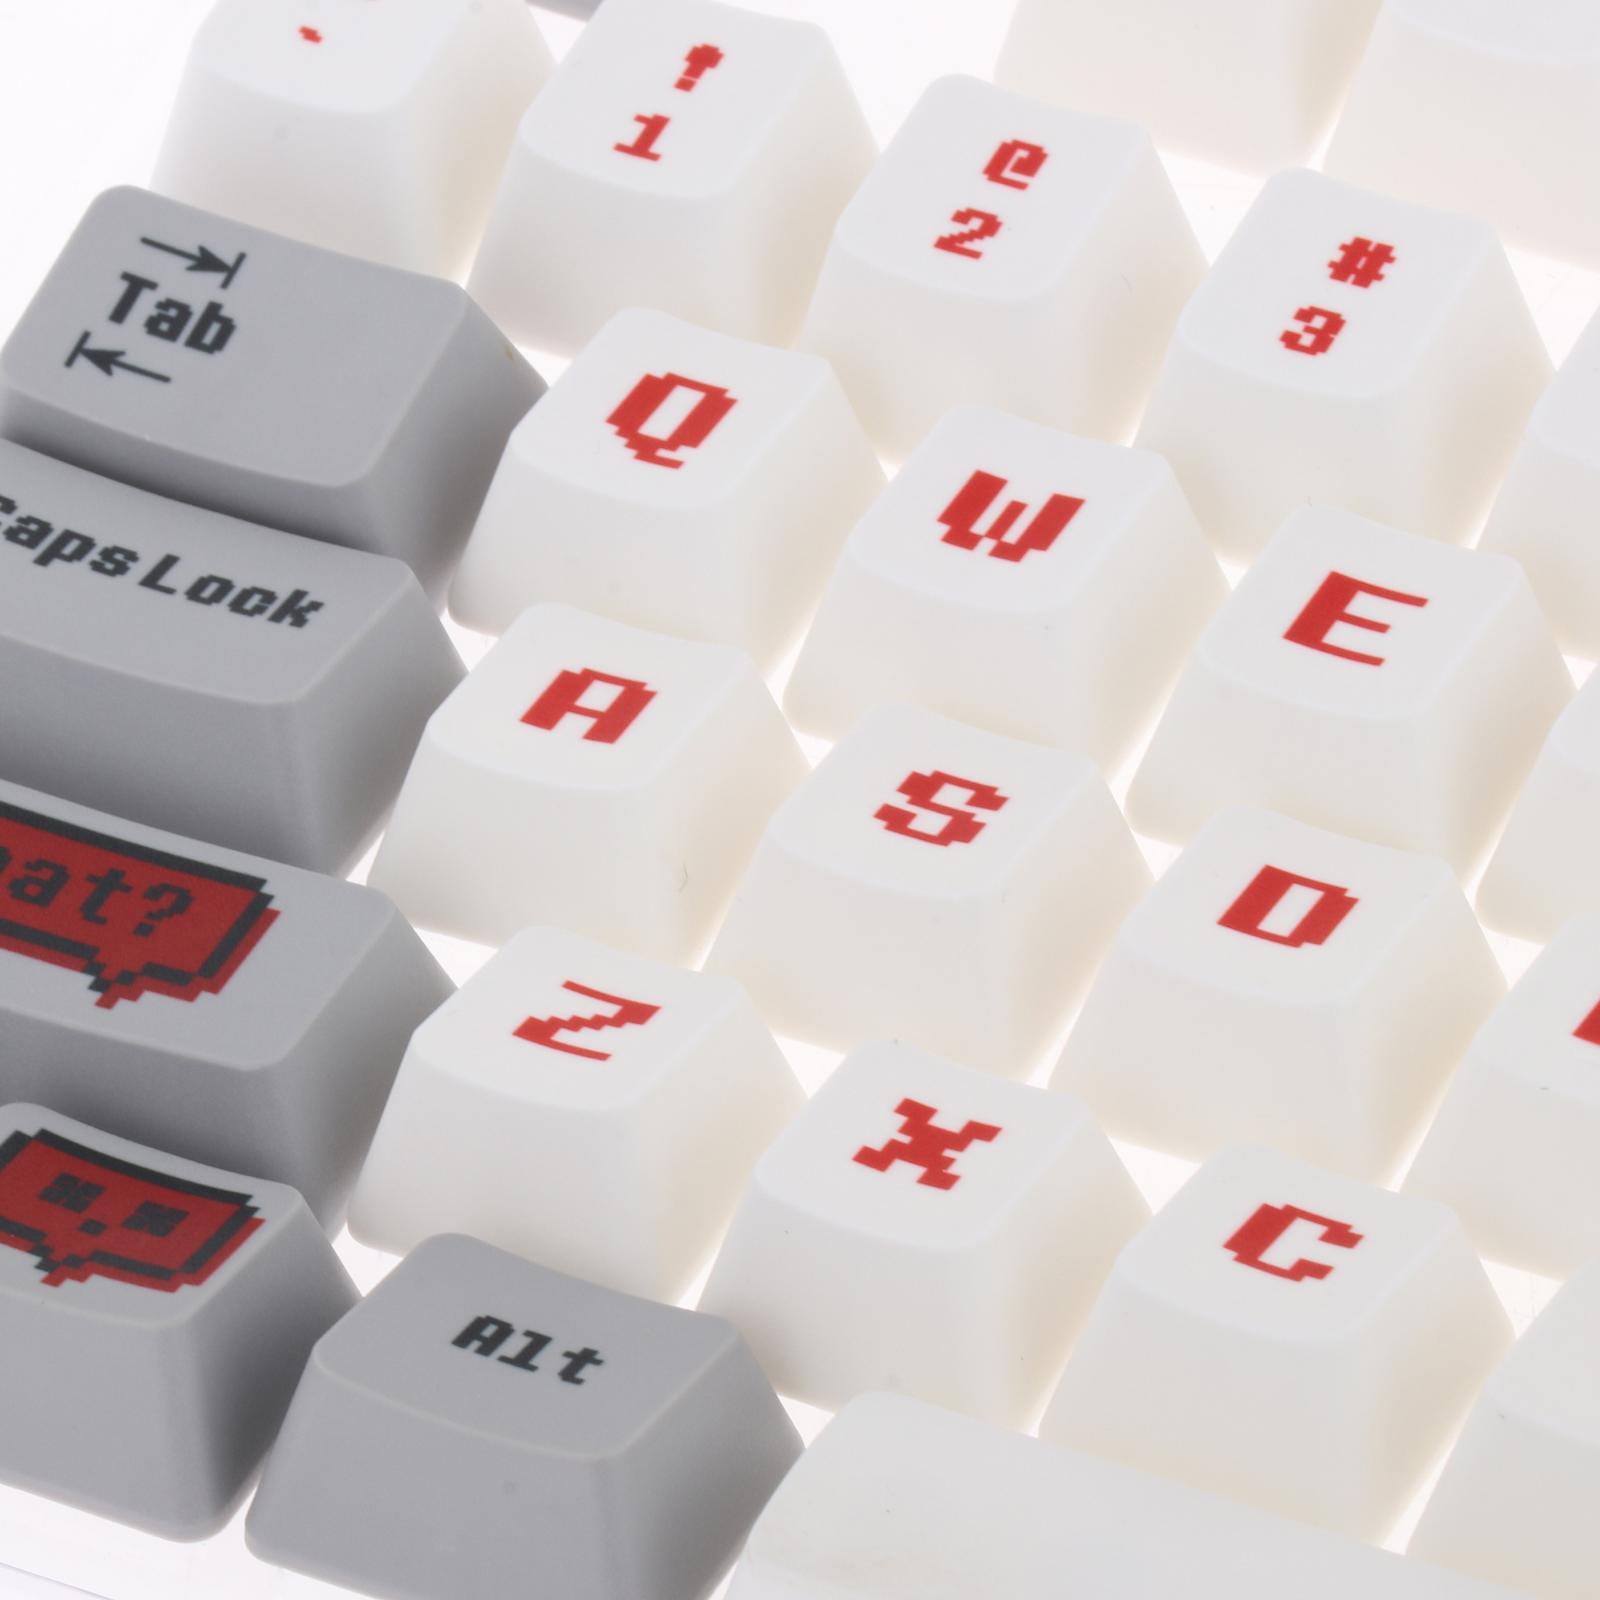 PBT Keycaps, Thermal Dye Sublimation PBT Keycaps Set OEM Profile 108 Keycap Set for MX for Switches Mechanical Gaming Keyboard